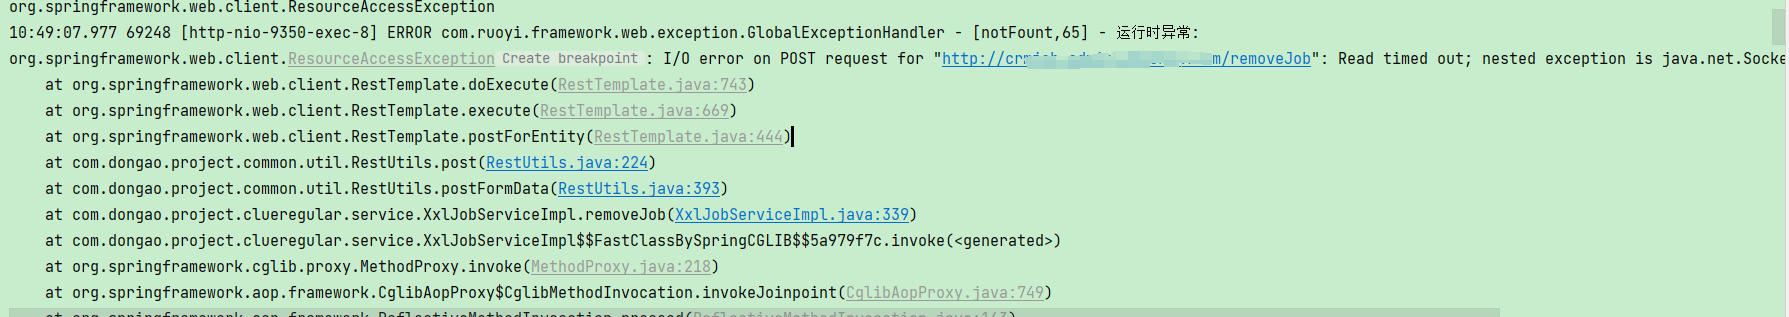 RestTemplate报错I/O error on POST request for 